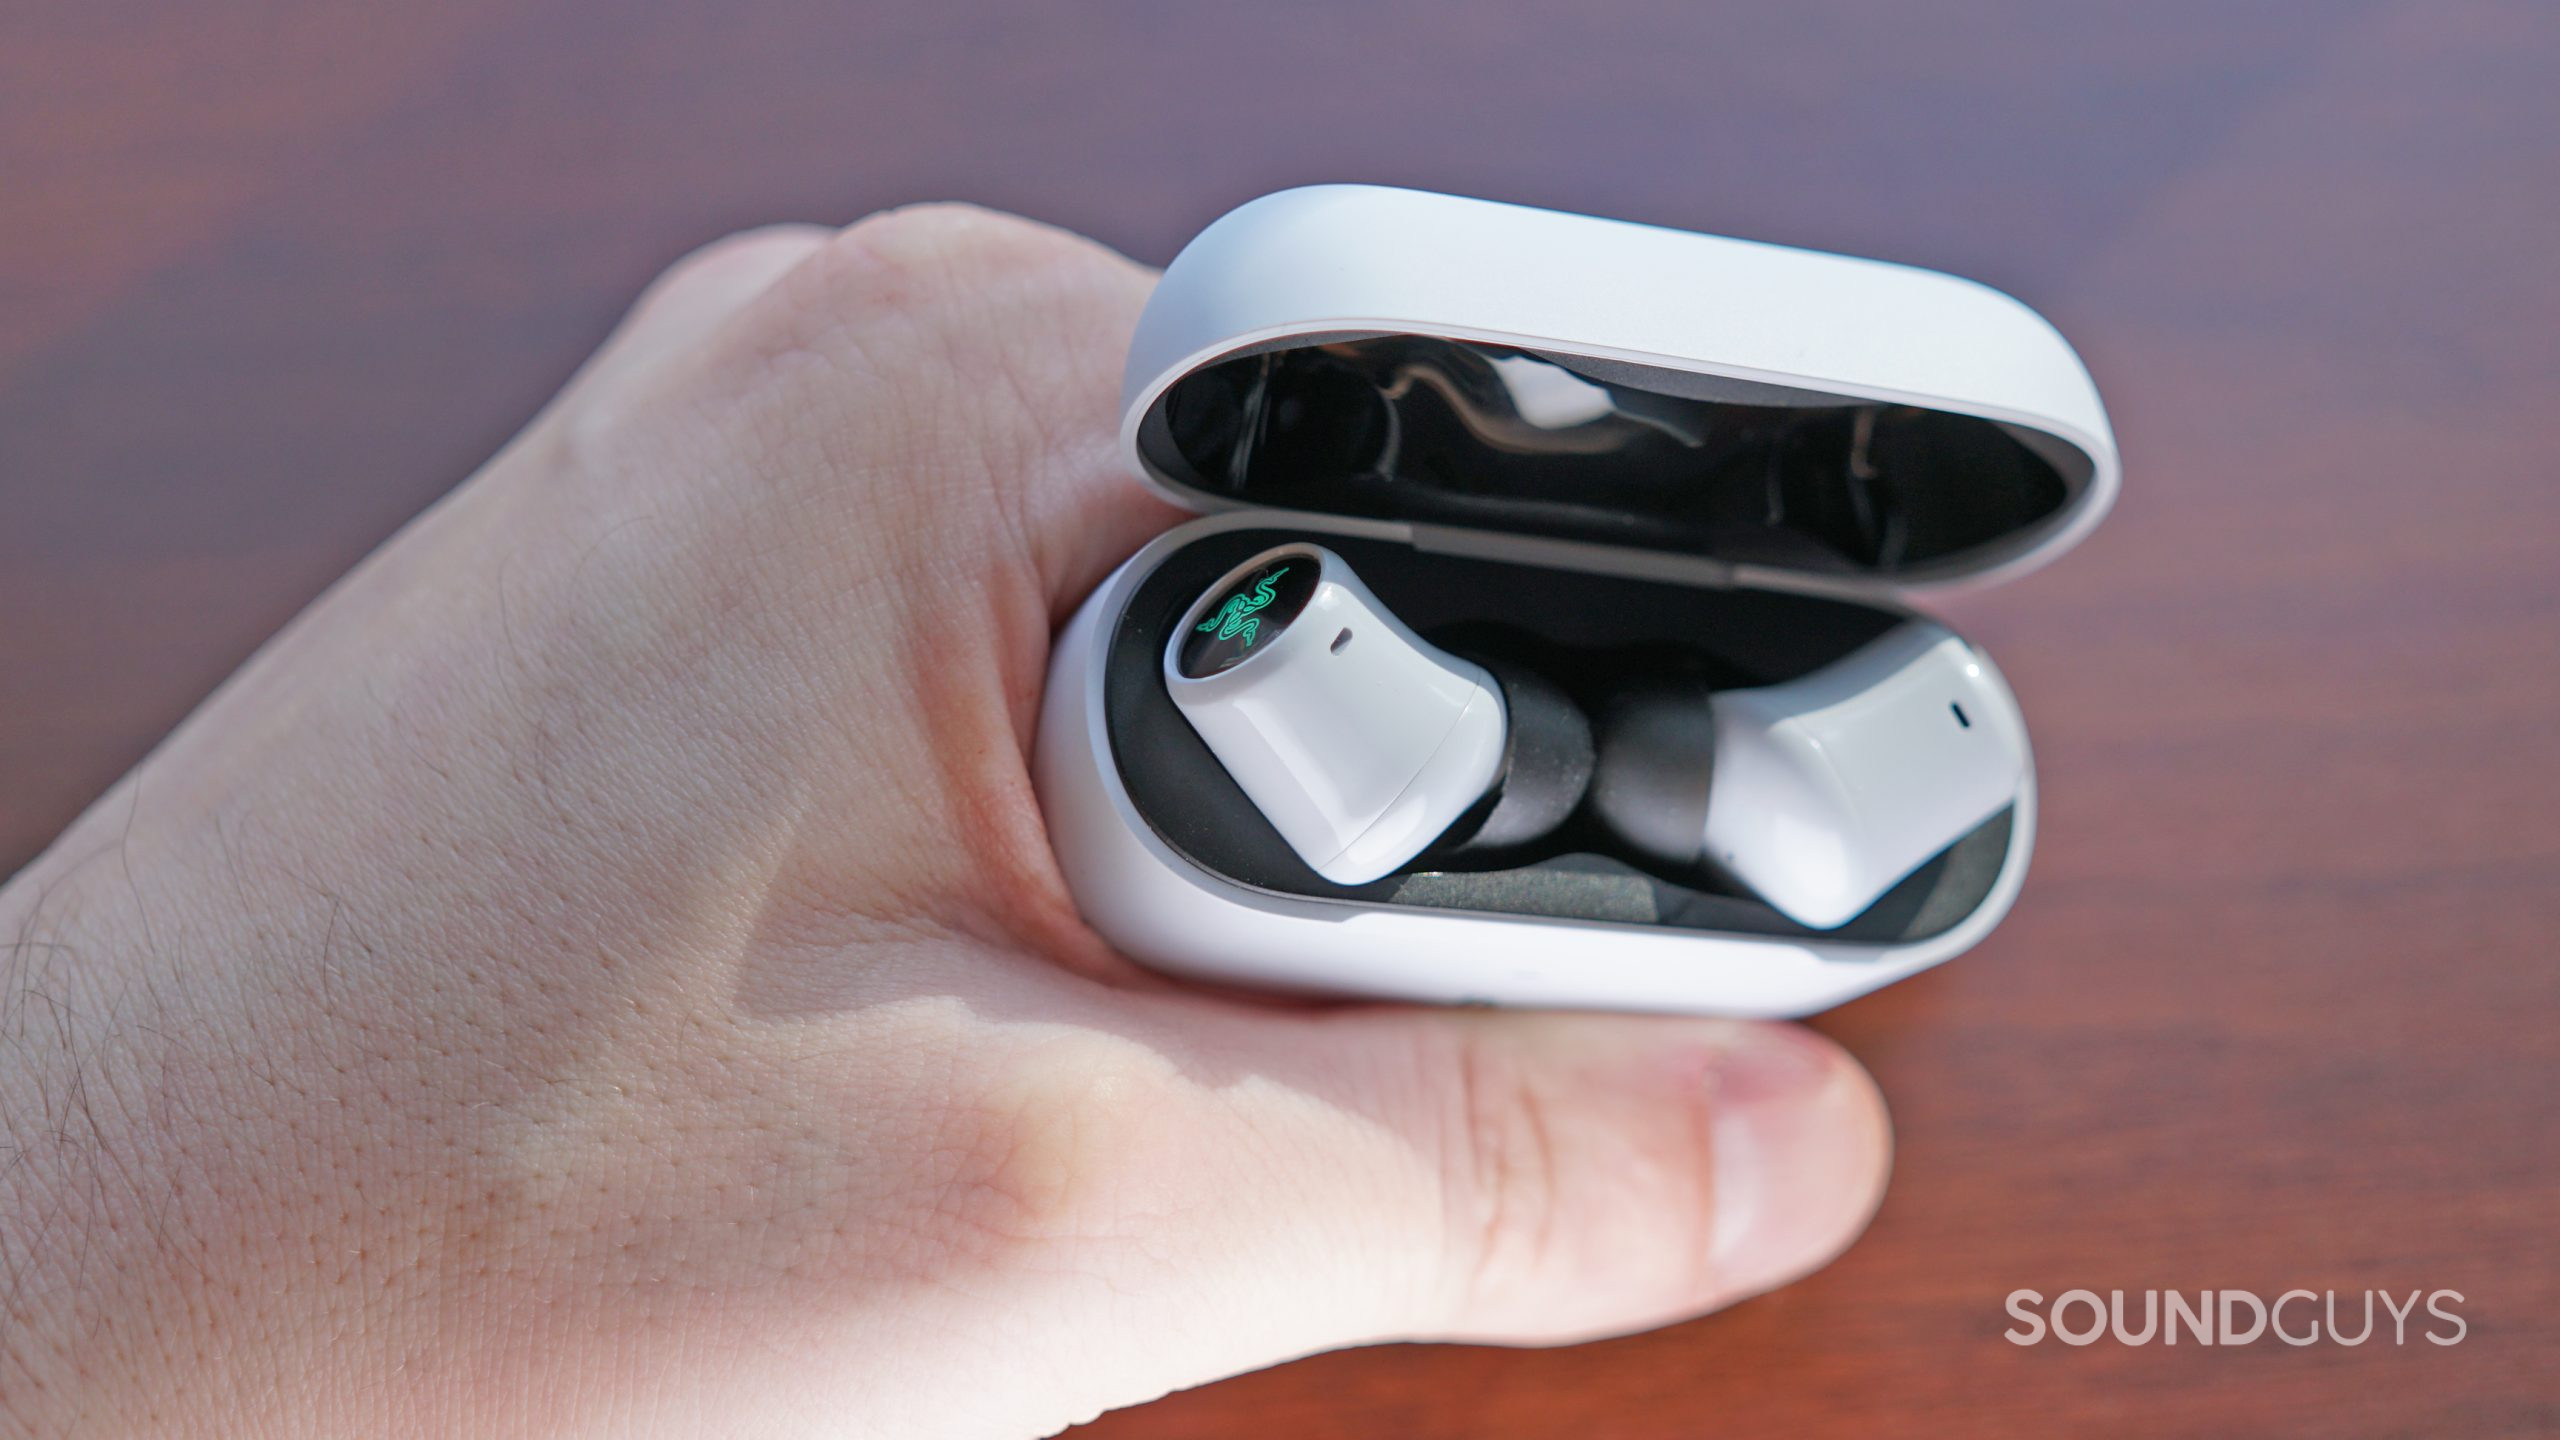 The Razer Hammerhead Hyperspeed earbuds sit in their charging case, being held by a hand.